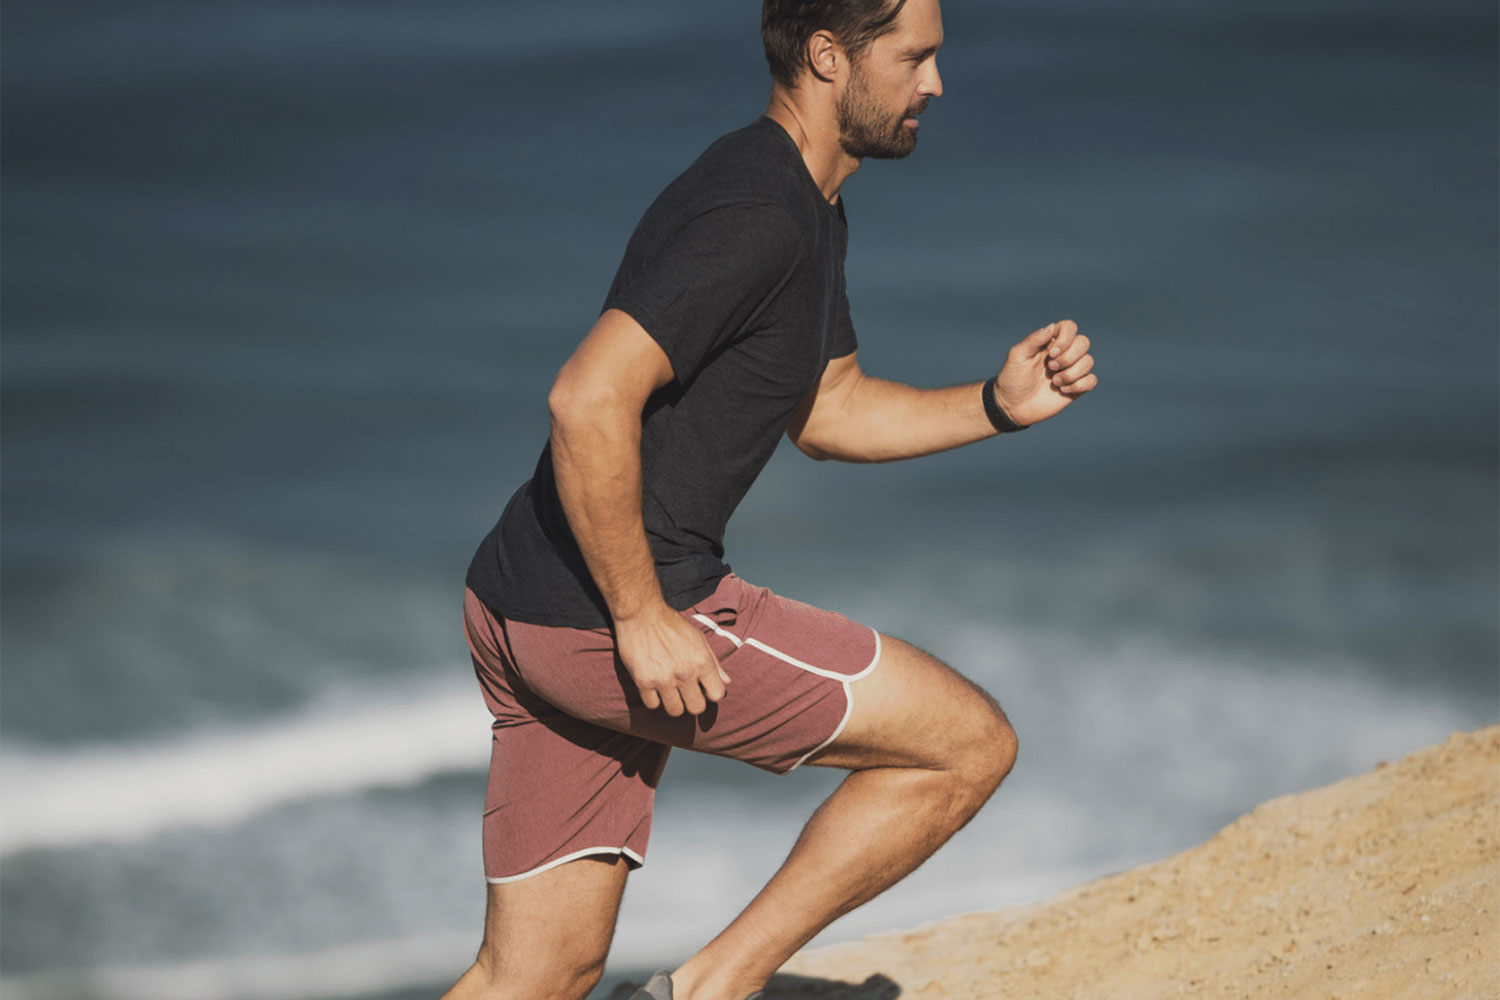 Product Review: These Sustainable Shorts Will Motivate You to Work Out -  The Manual